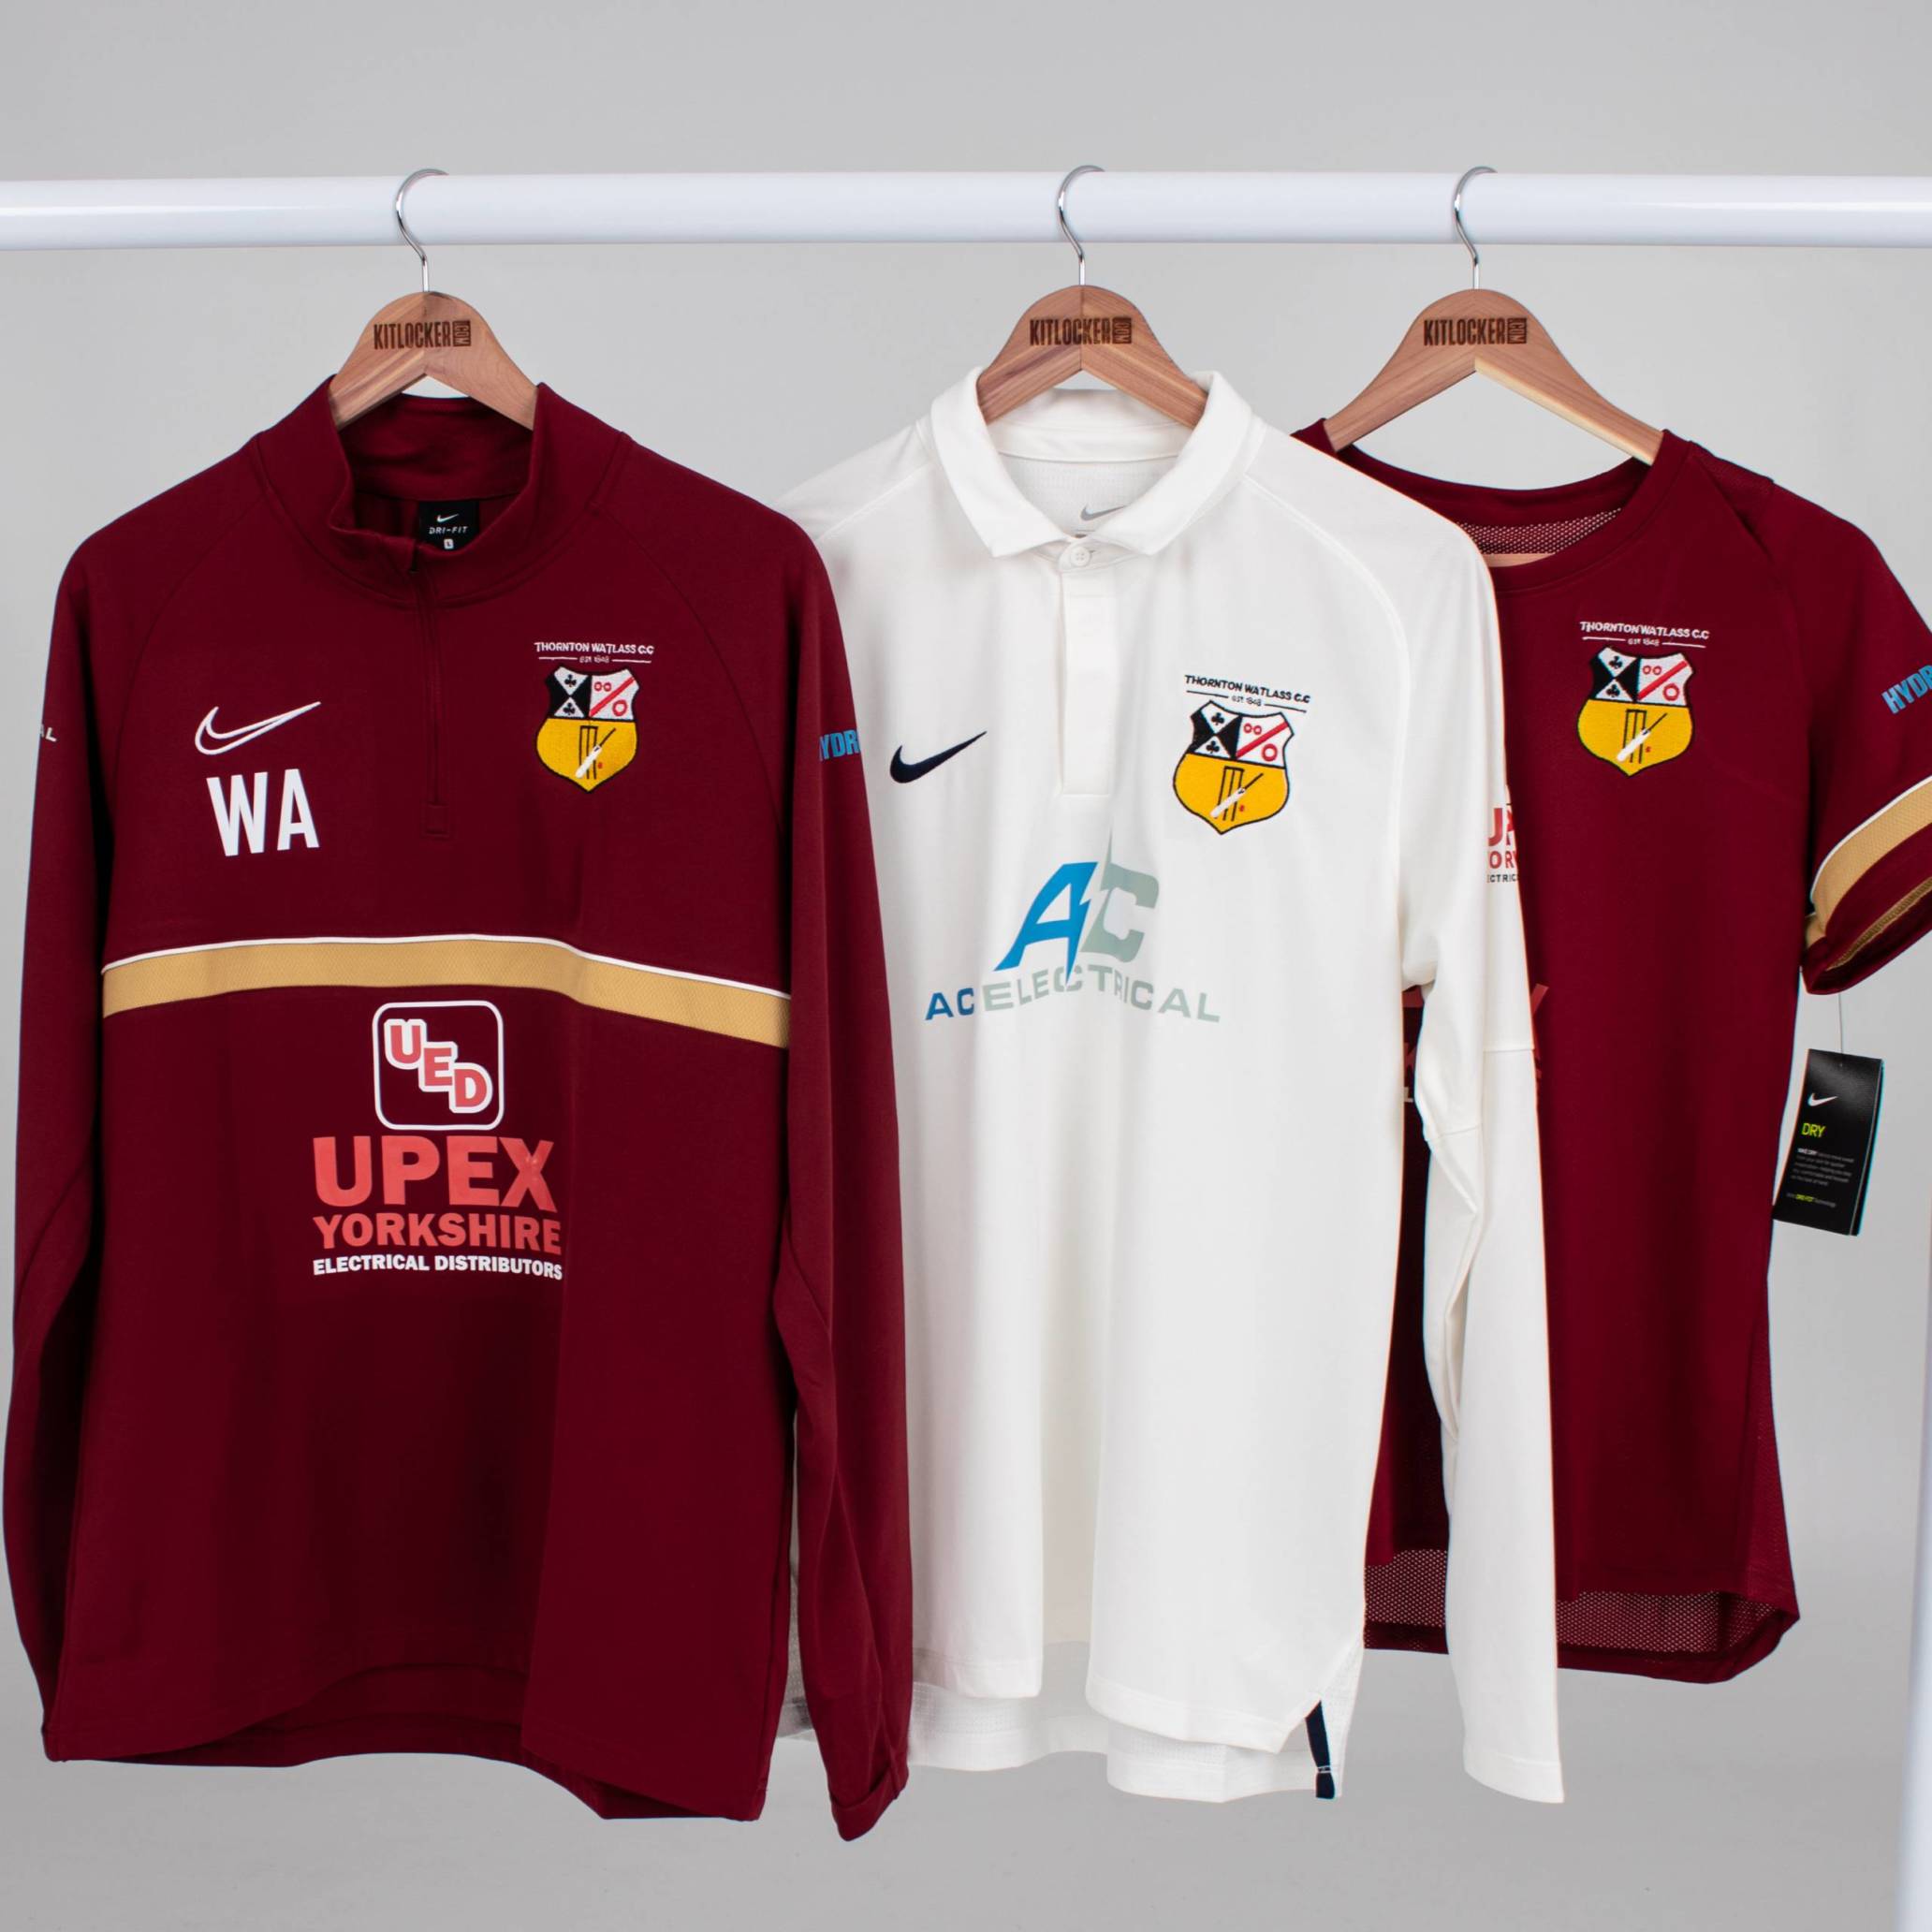 Build an Online Store for Your Cricket Club